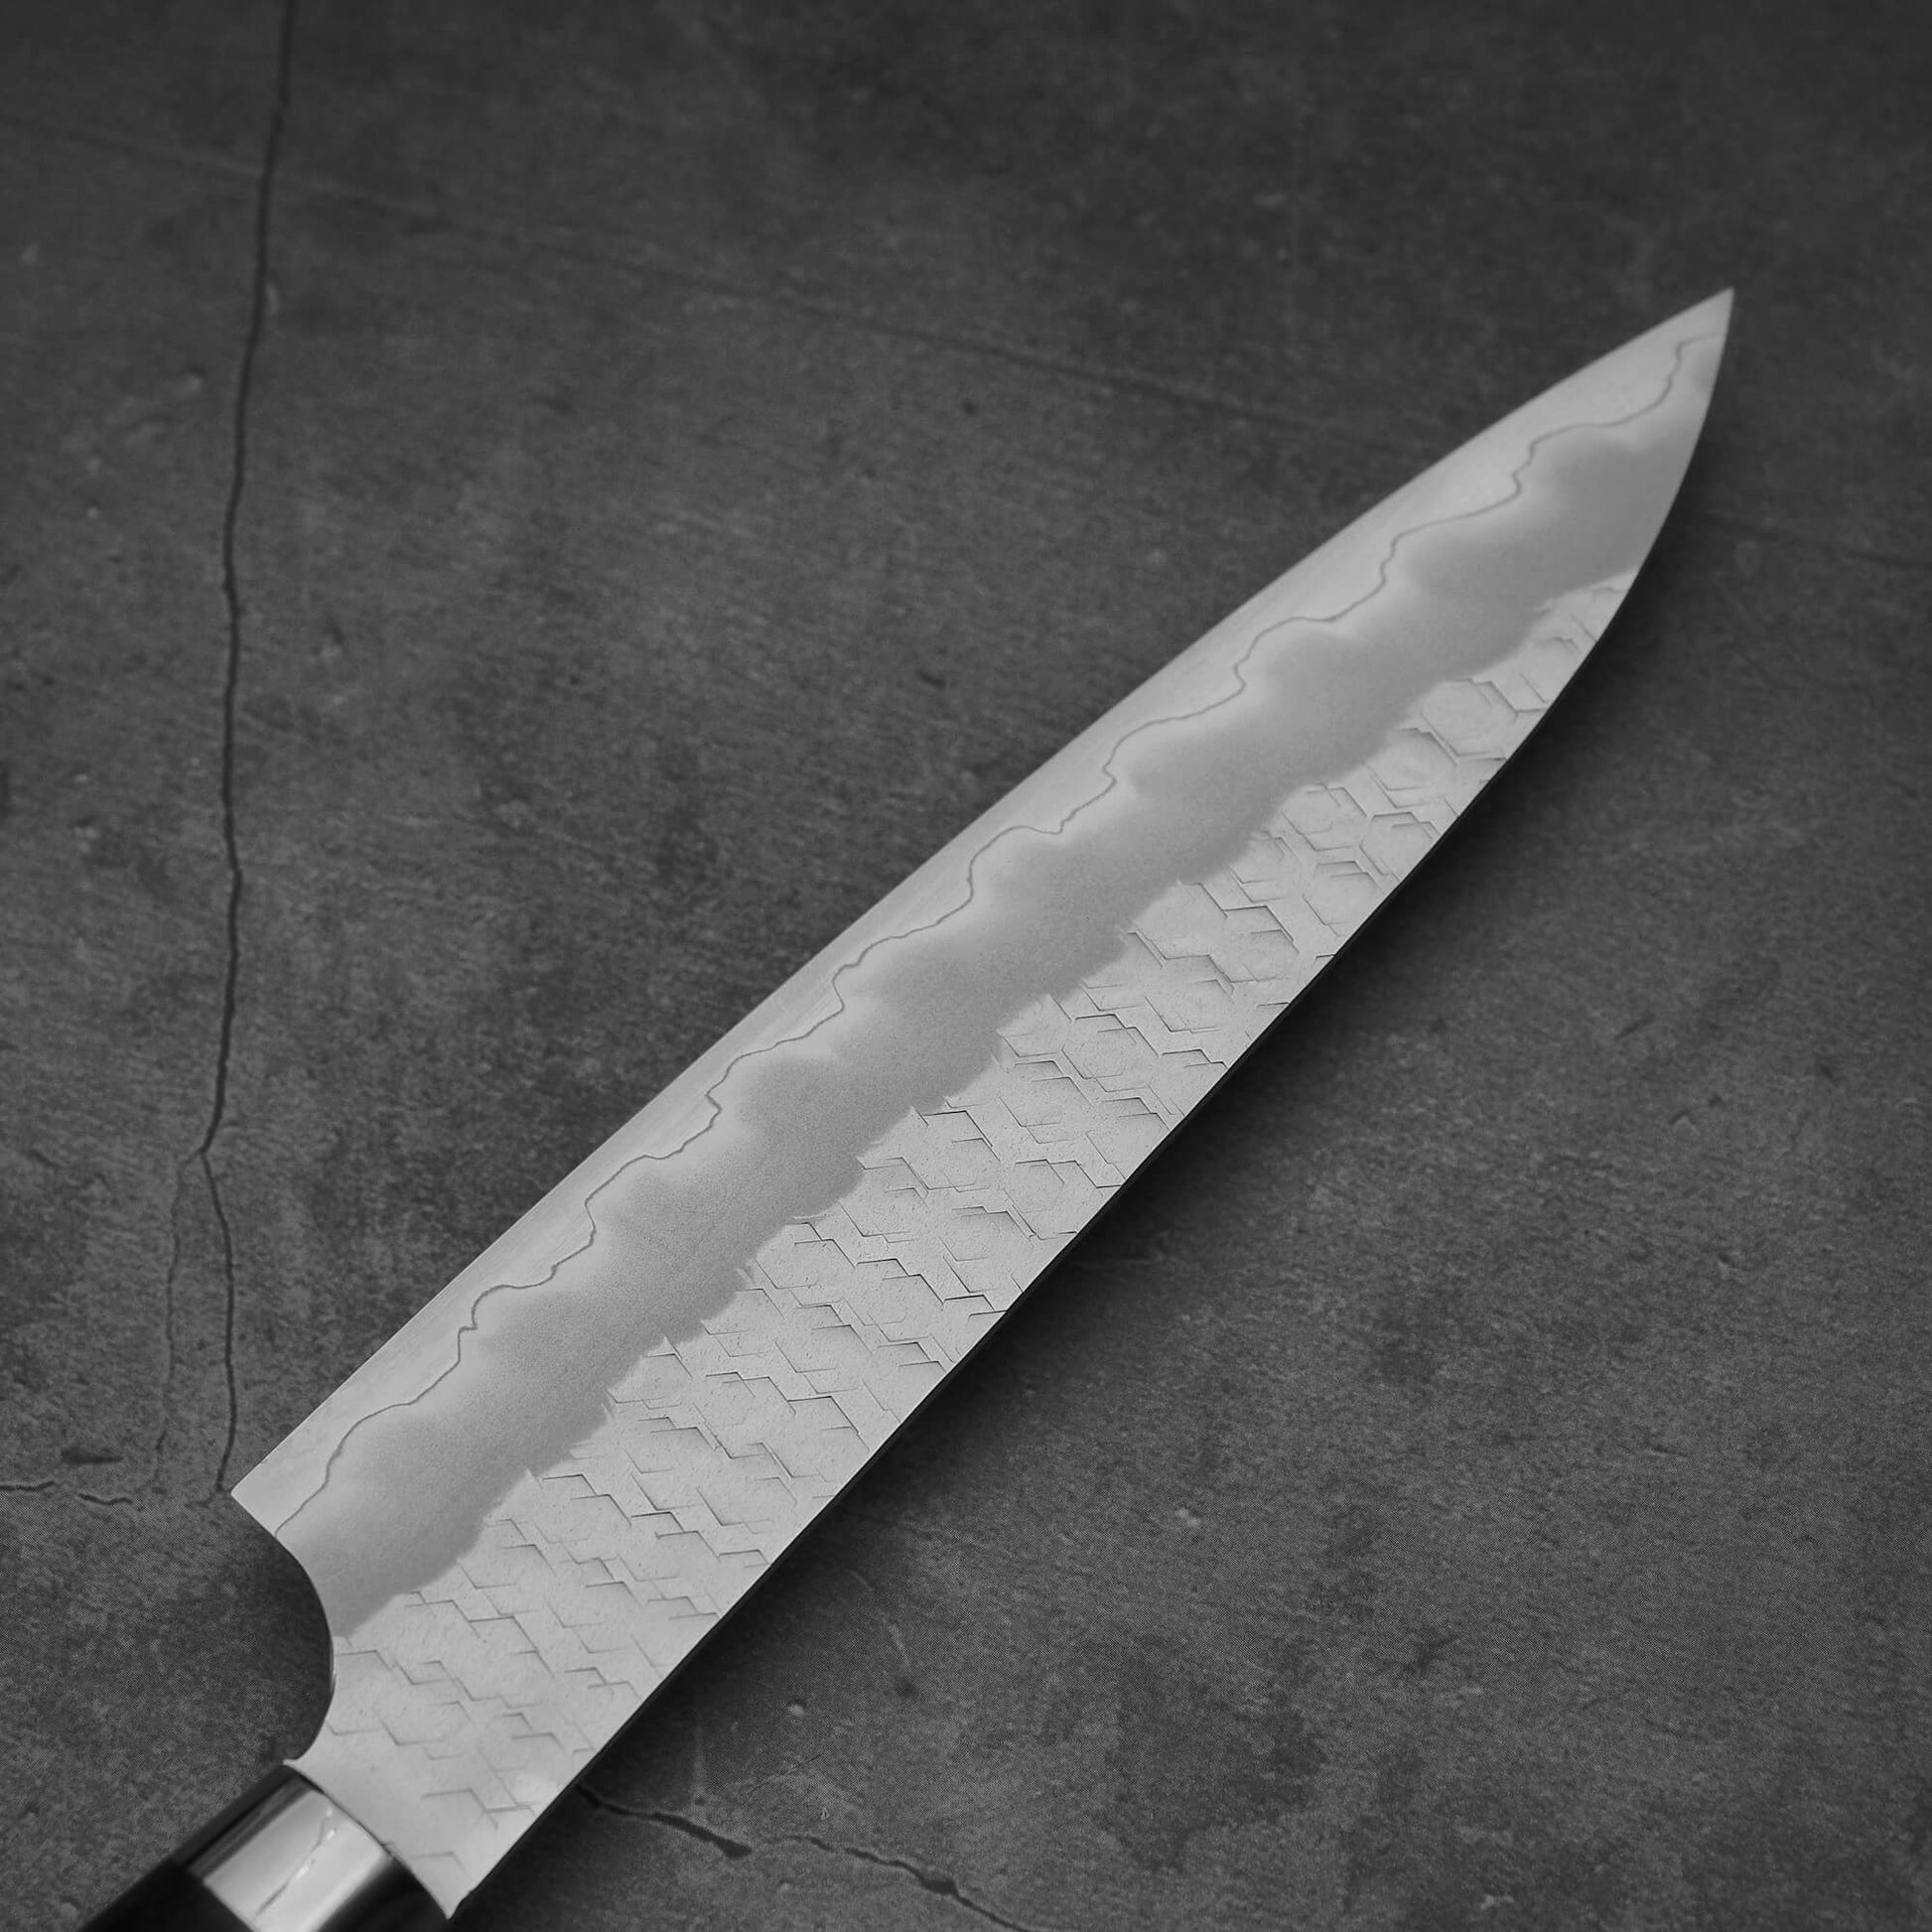 Top view of the other side of the blade of Nigara tsuchime SG2 petty knife 150mm